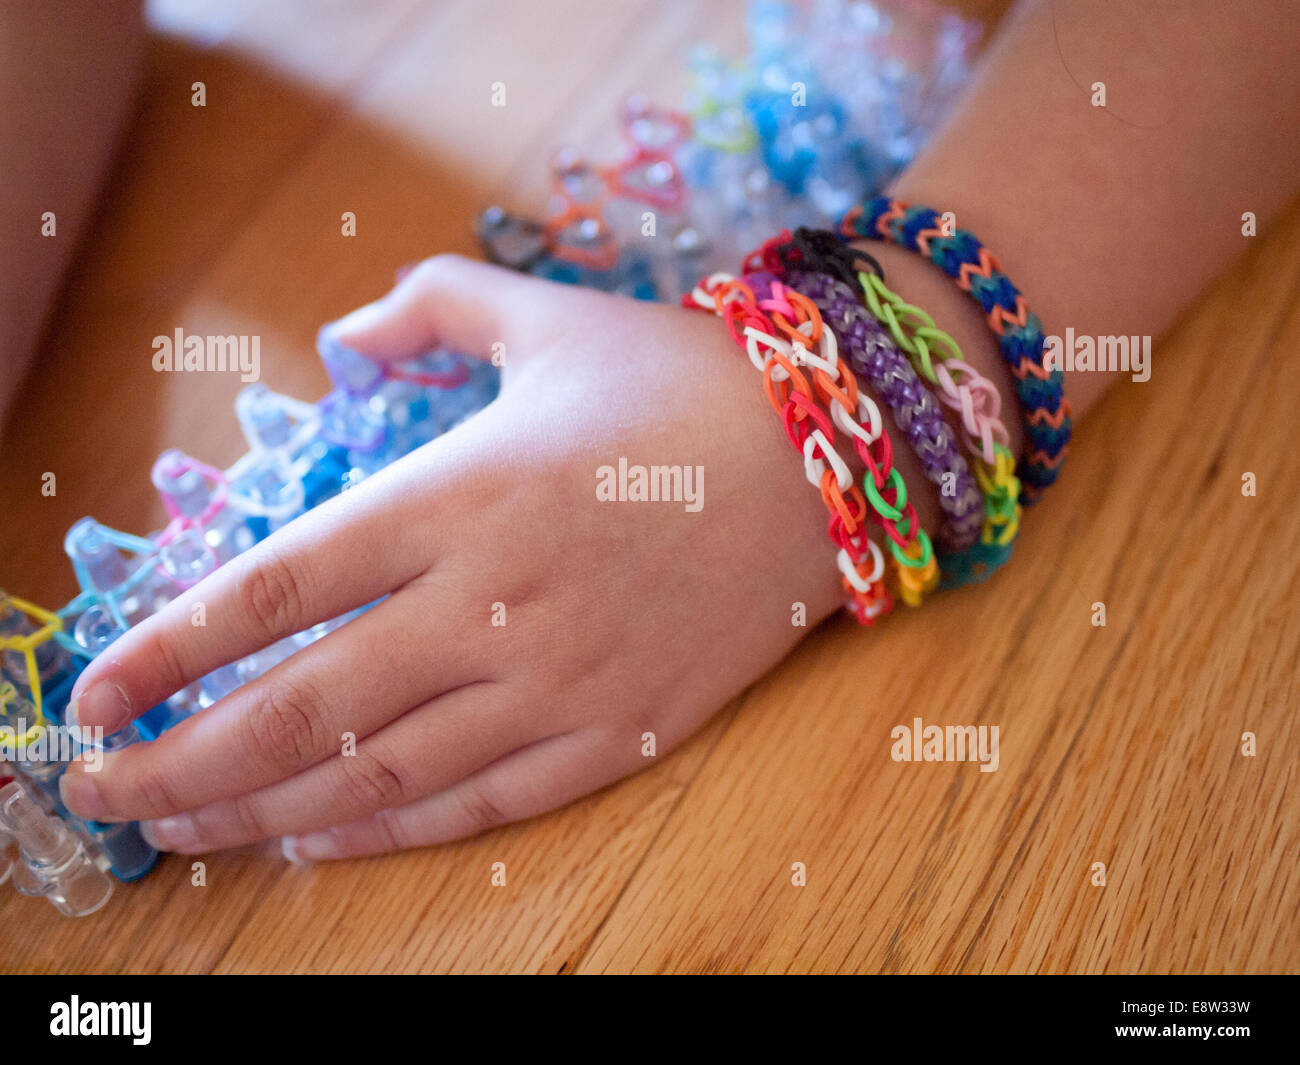 A little girl shows her Rainbow Loom bracelets. Rainbow Loom is a toy loom used to weave rubber bands into bracelets and charms. Stock Photo